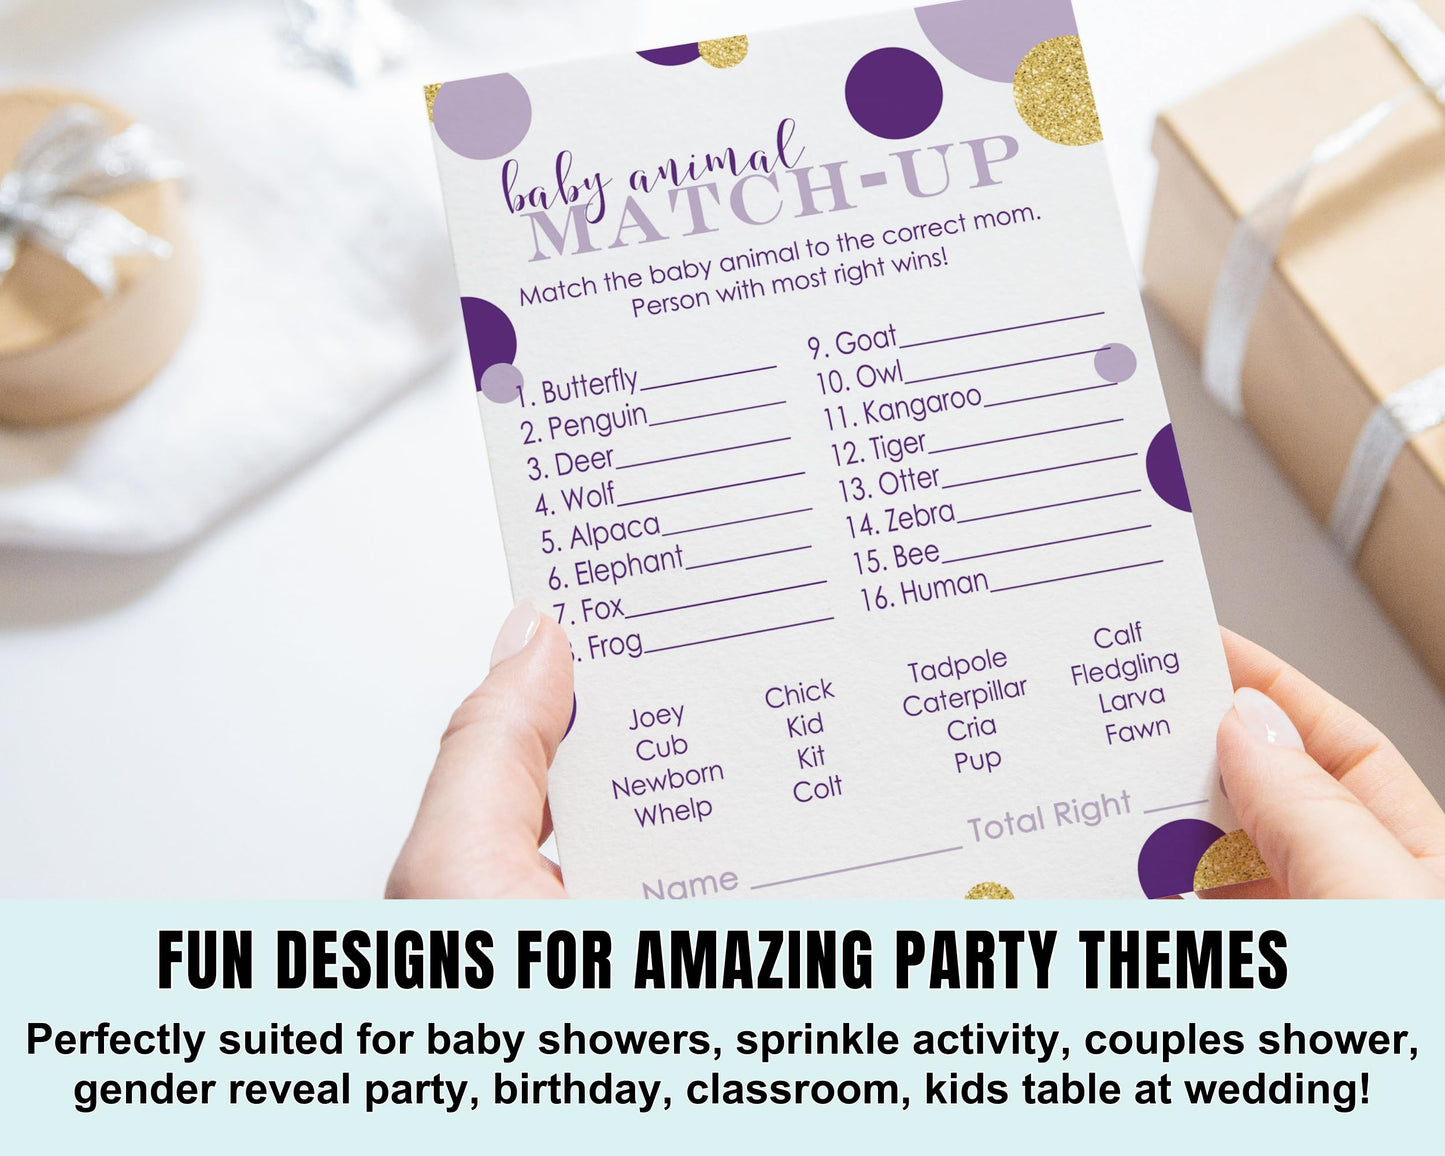 Occasions Fun Guessing Activities Guests Play, Royal Princess Mermaid Ideas, 4x6, 25 PackPaper Clever Party